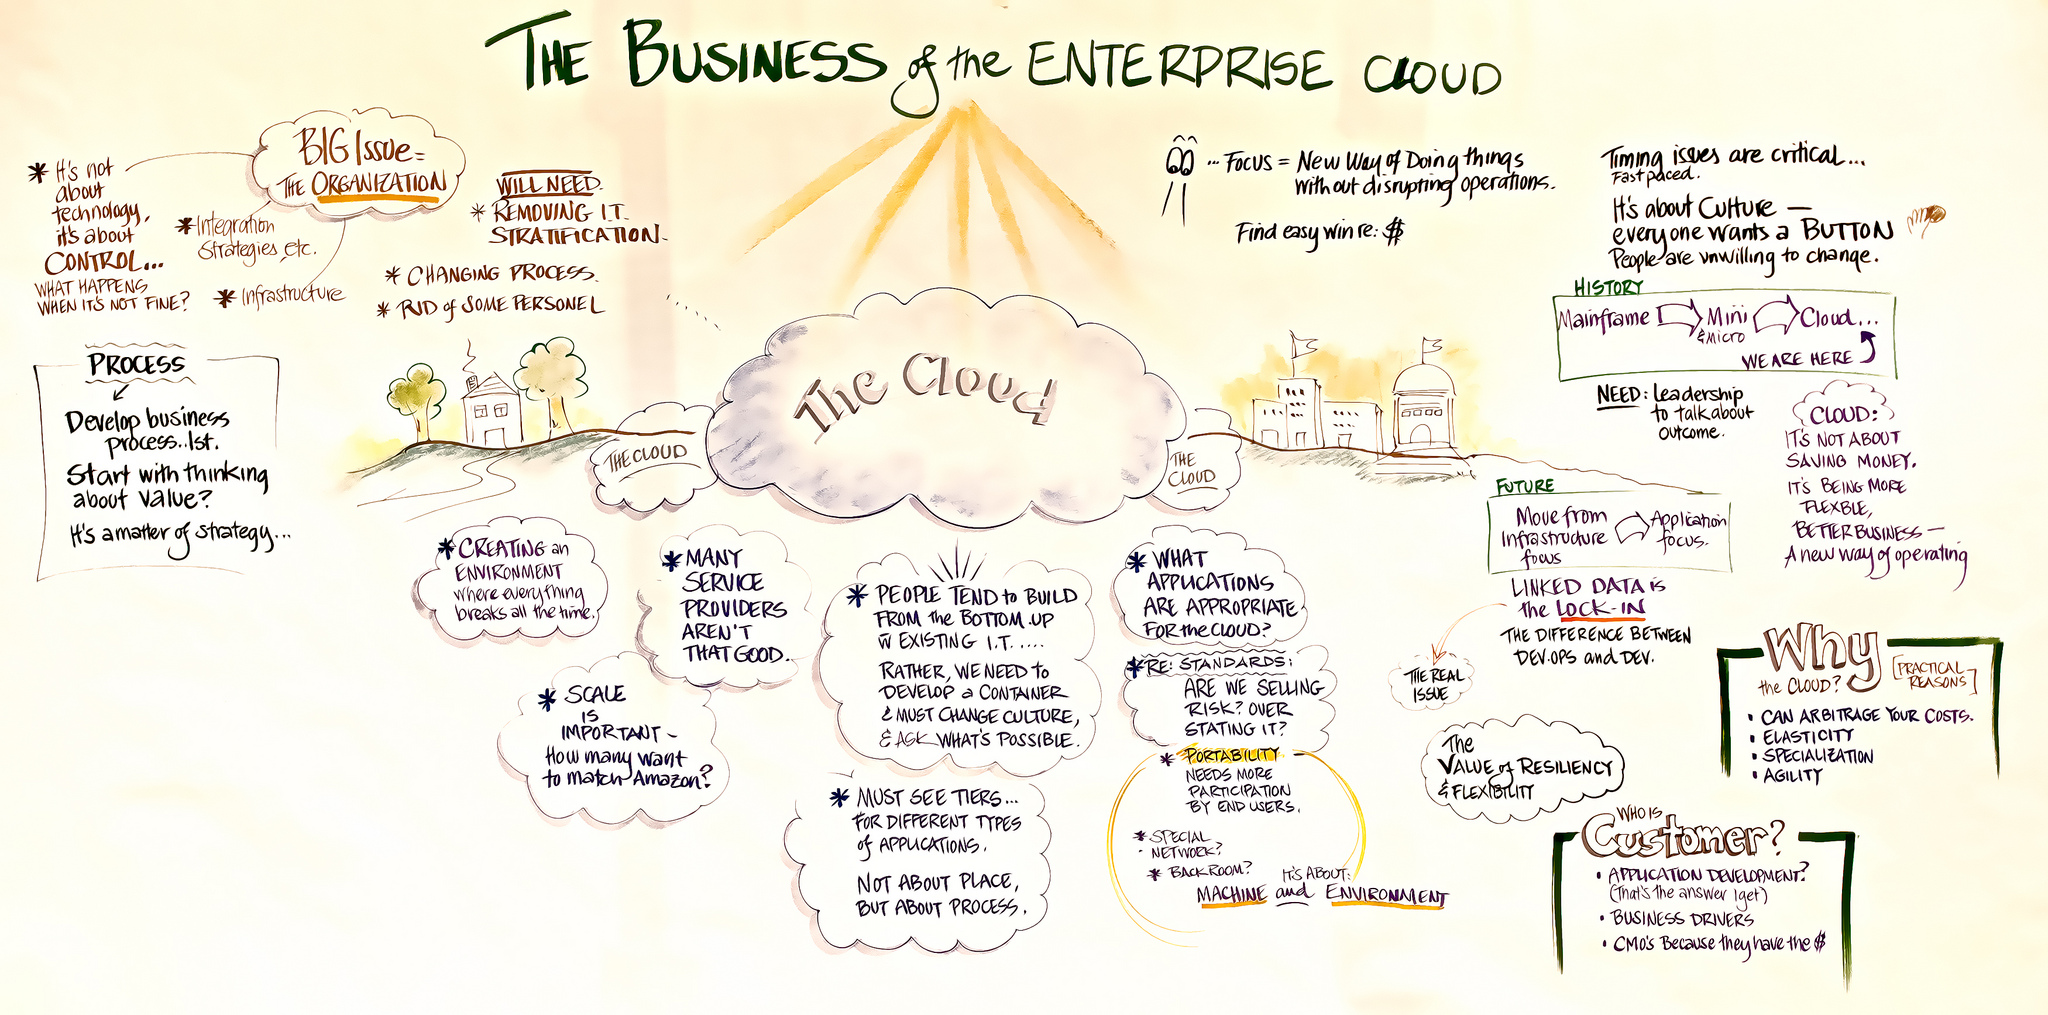 The business of the enterprise cloud